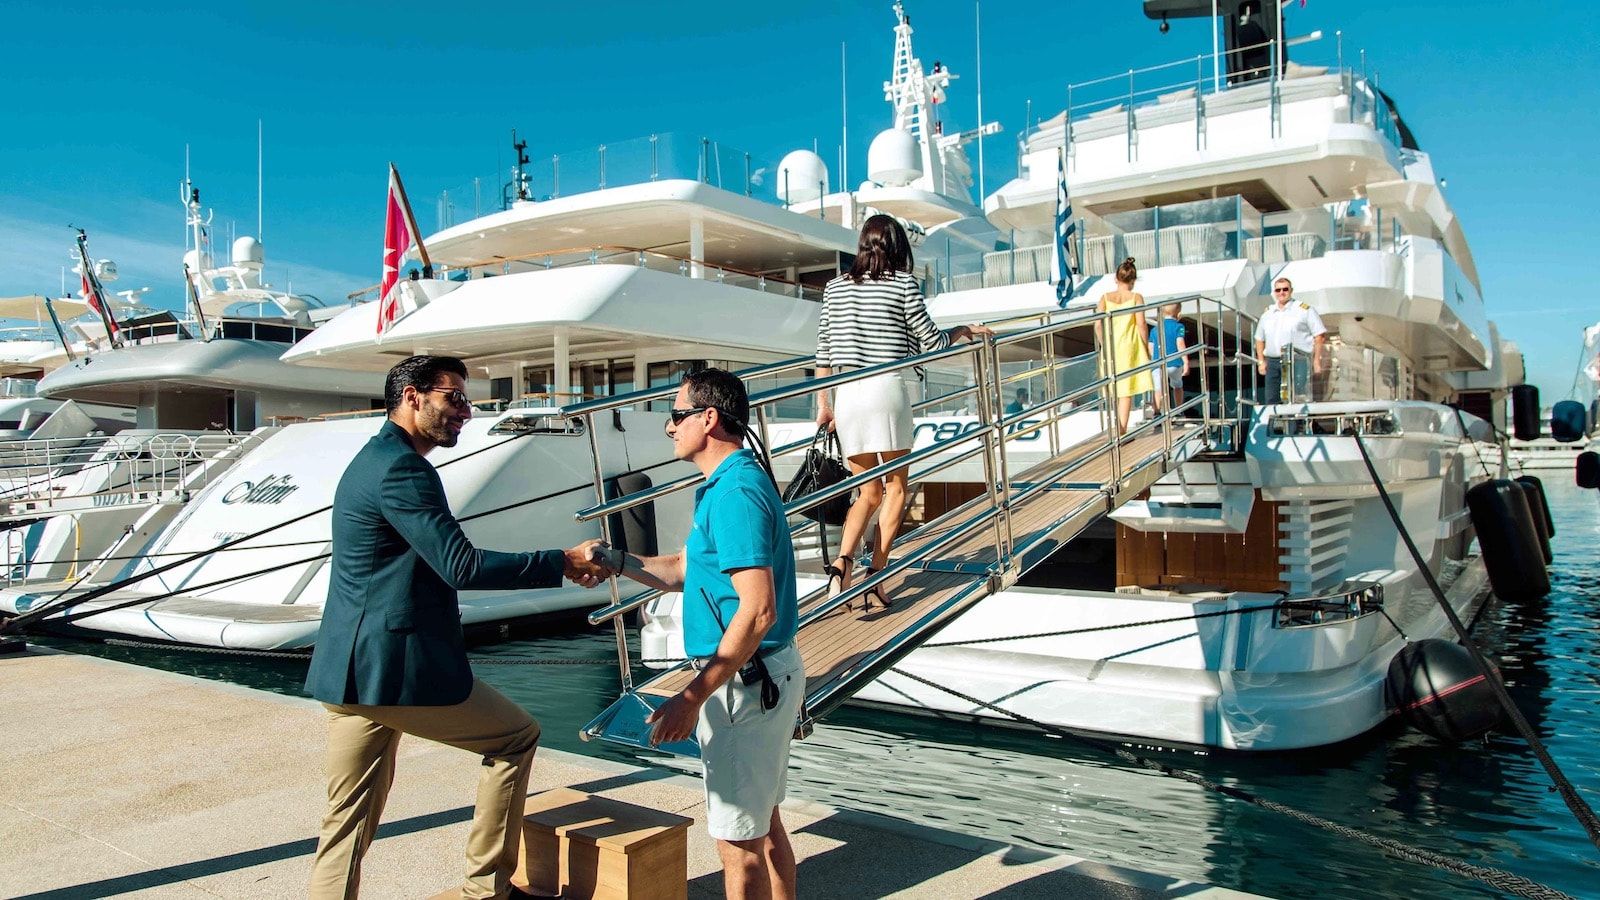 Ouranos_Charter_yacht_Iyc_welcome